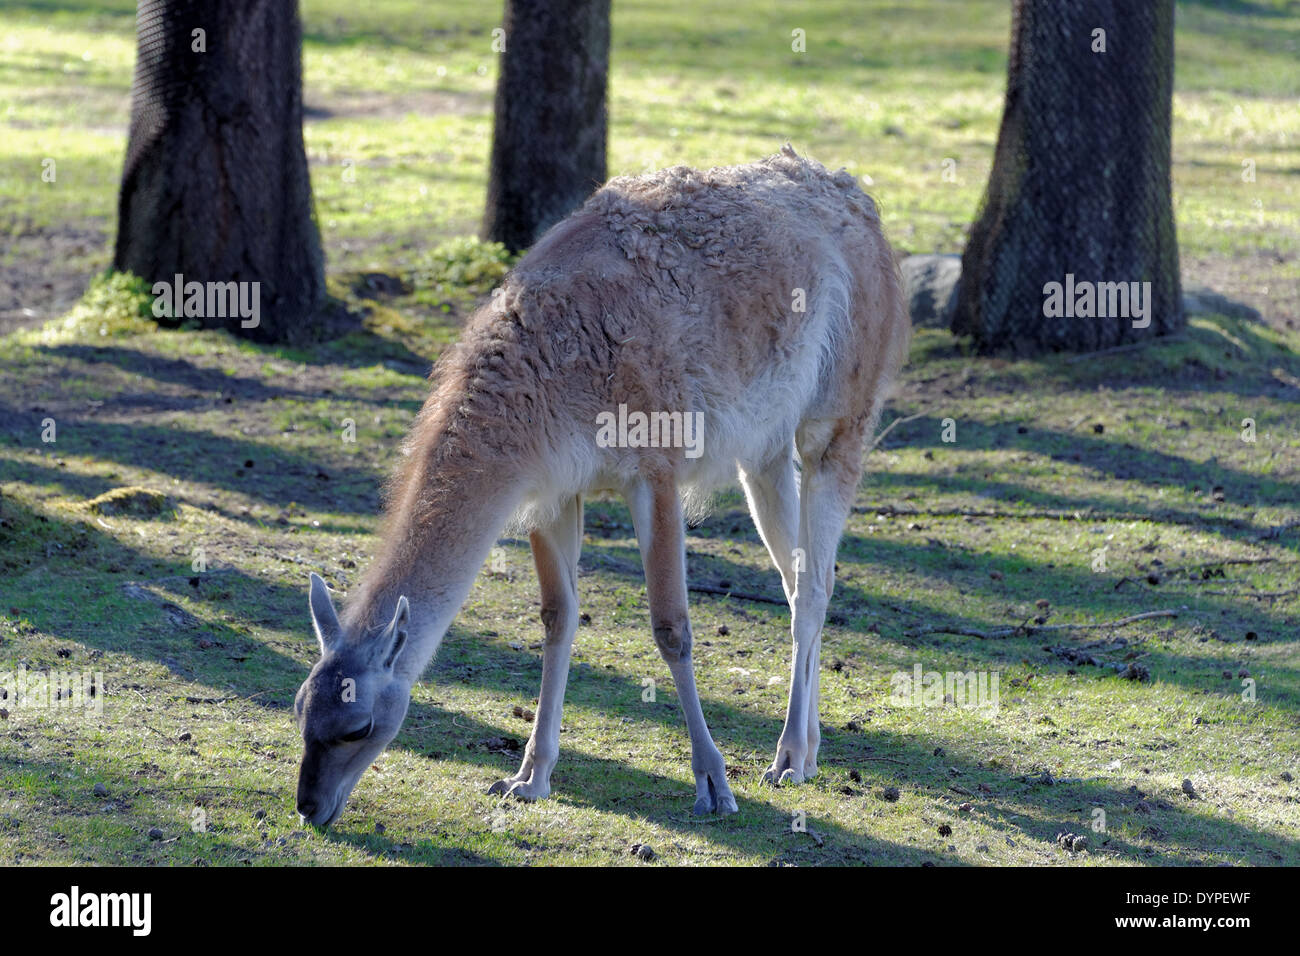 Guanaco (Lama guanicoe) is a camelid native to South America that stands between 1 and 1.2 metres. Stock Photo